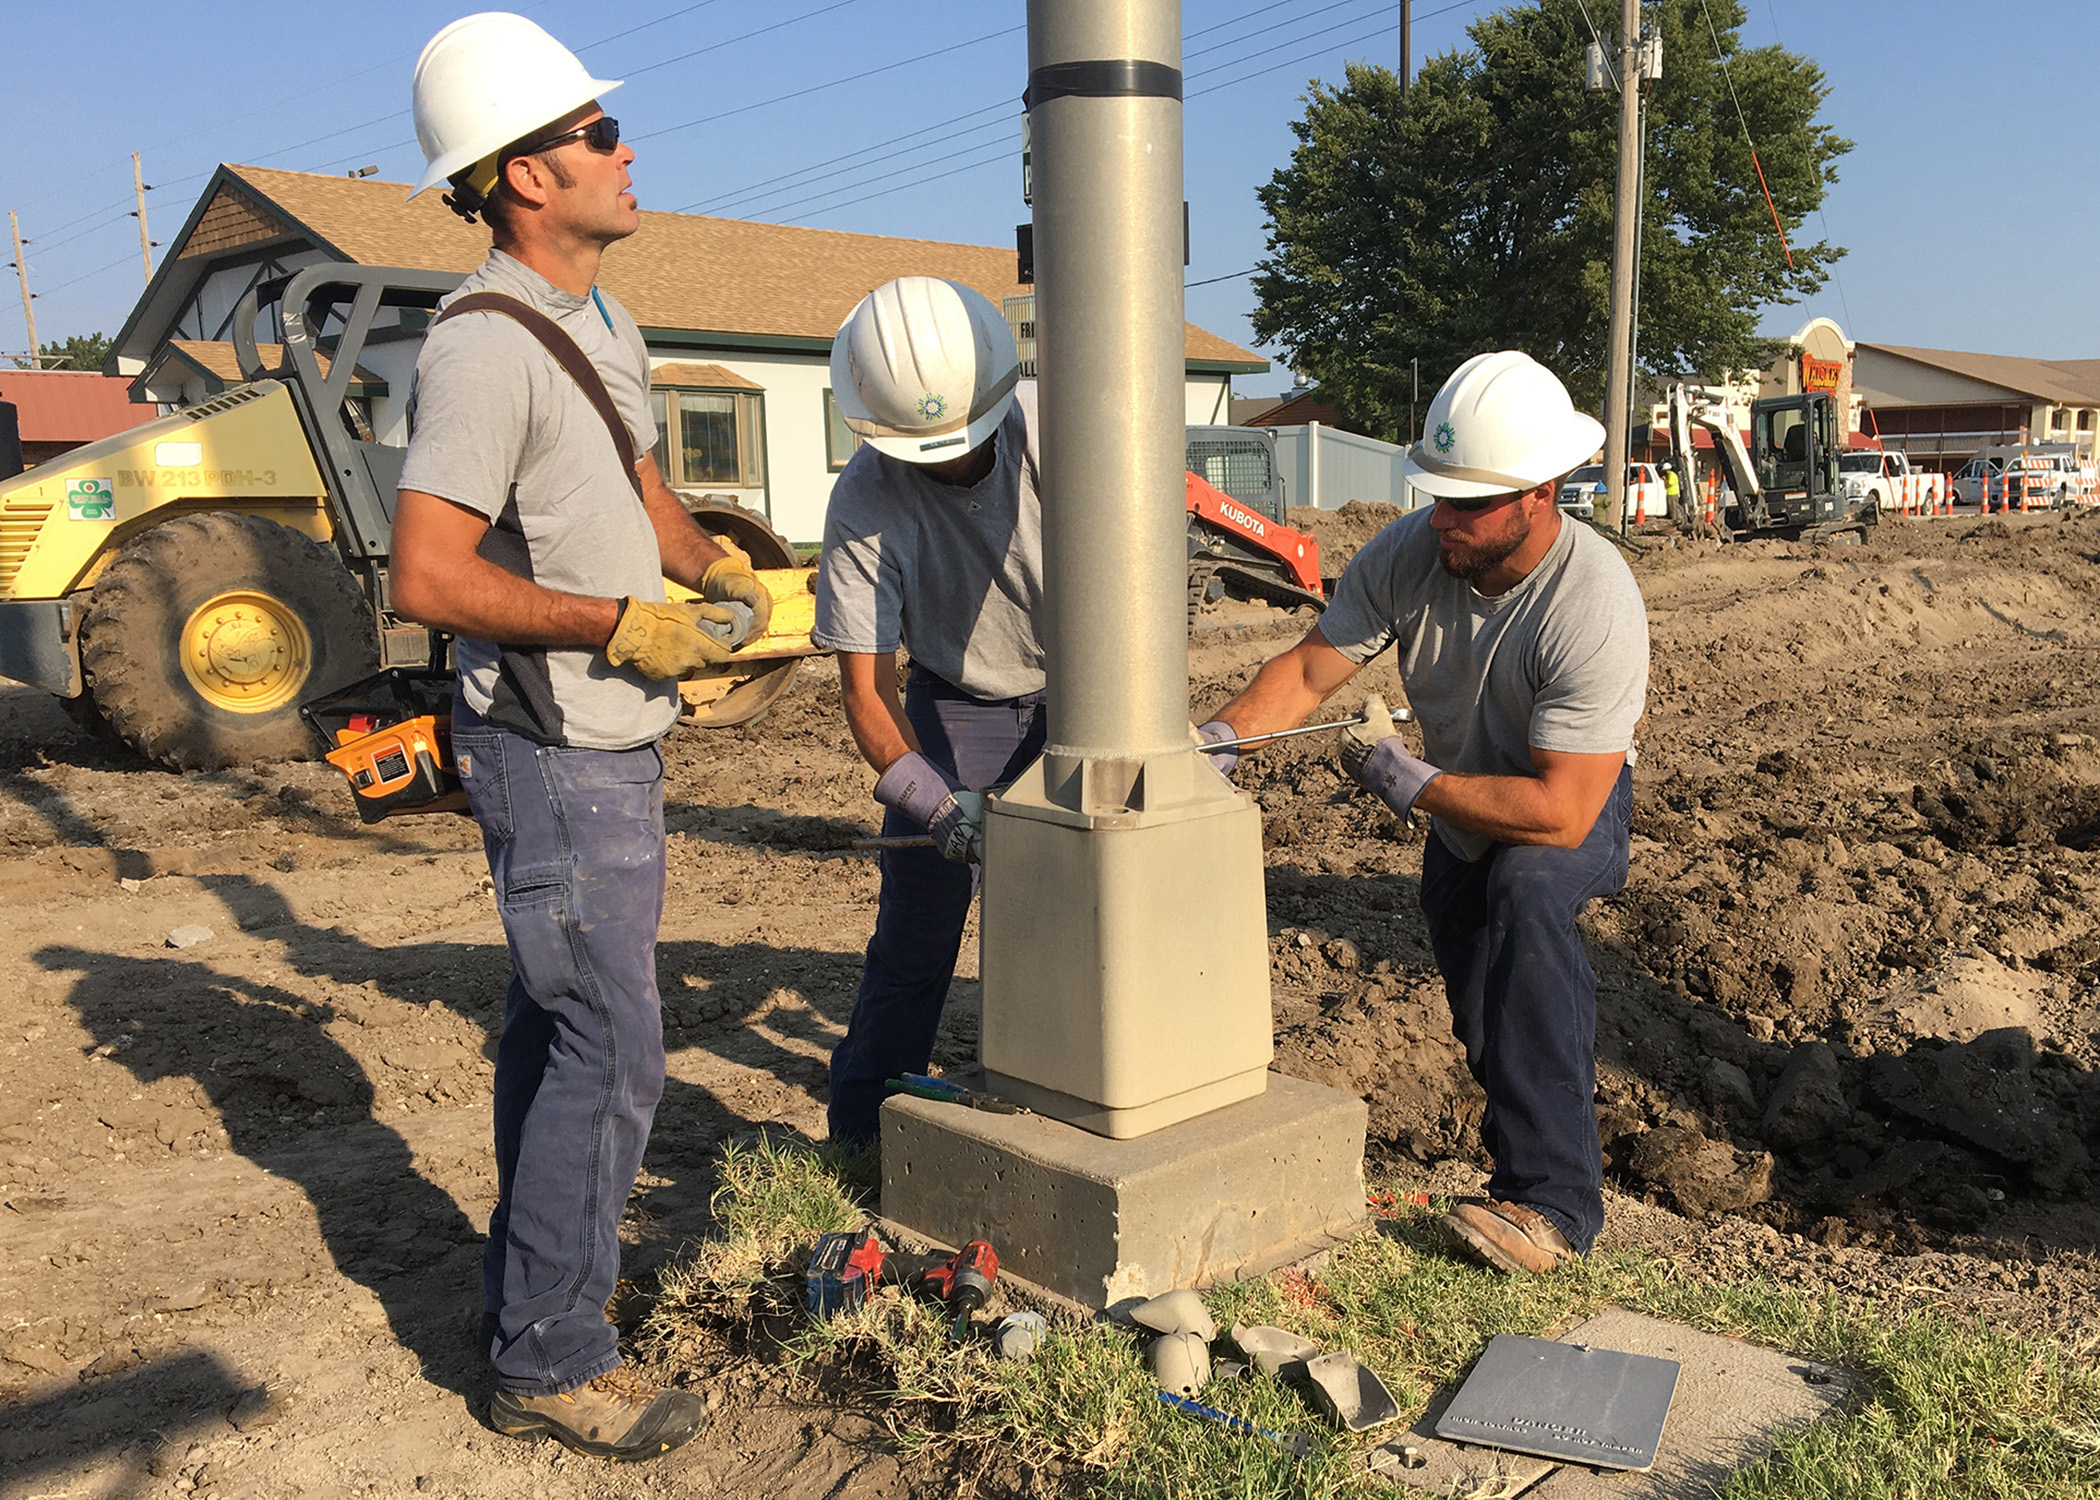 Three electric linemen use wrenches to detach a light pole from its base.  The workers are in grey shirts, wearing white helmets.